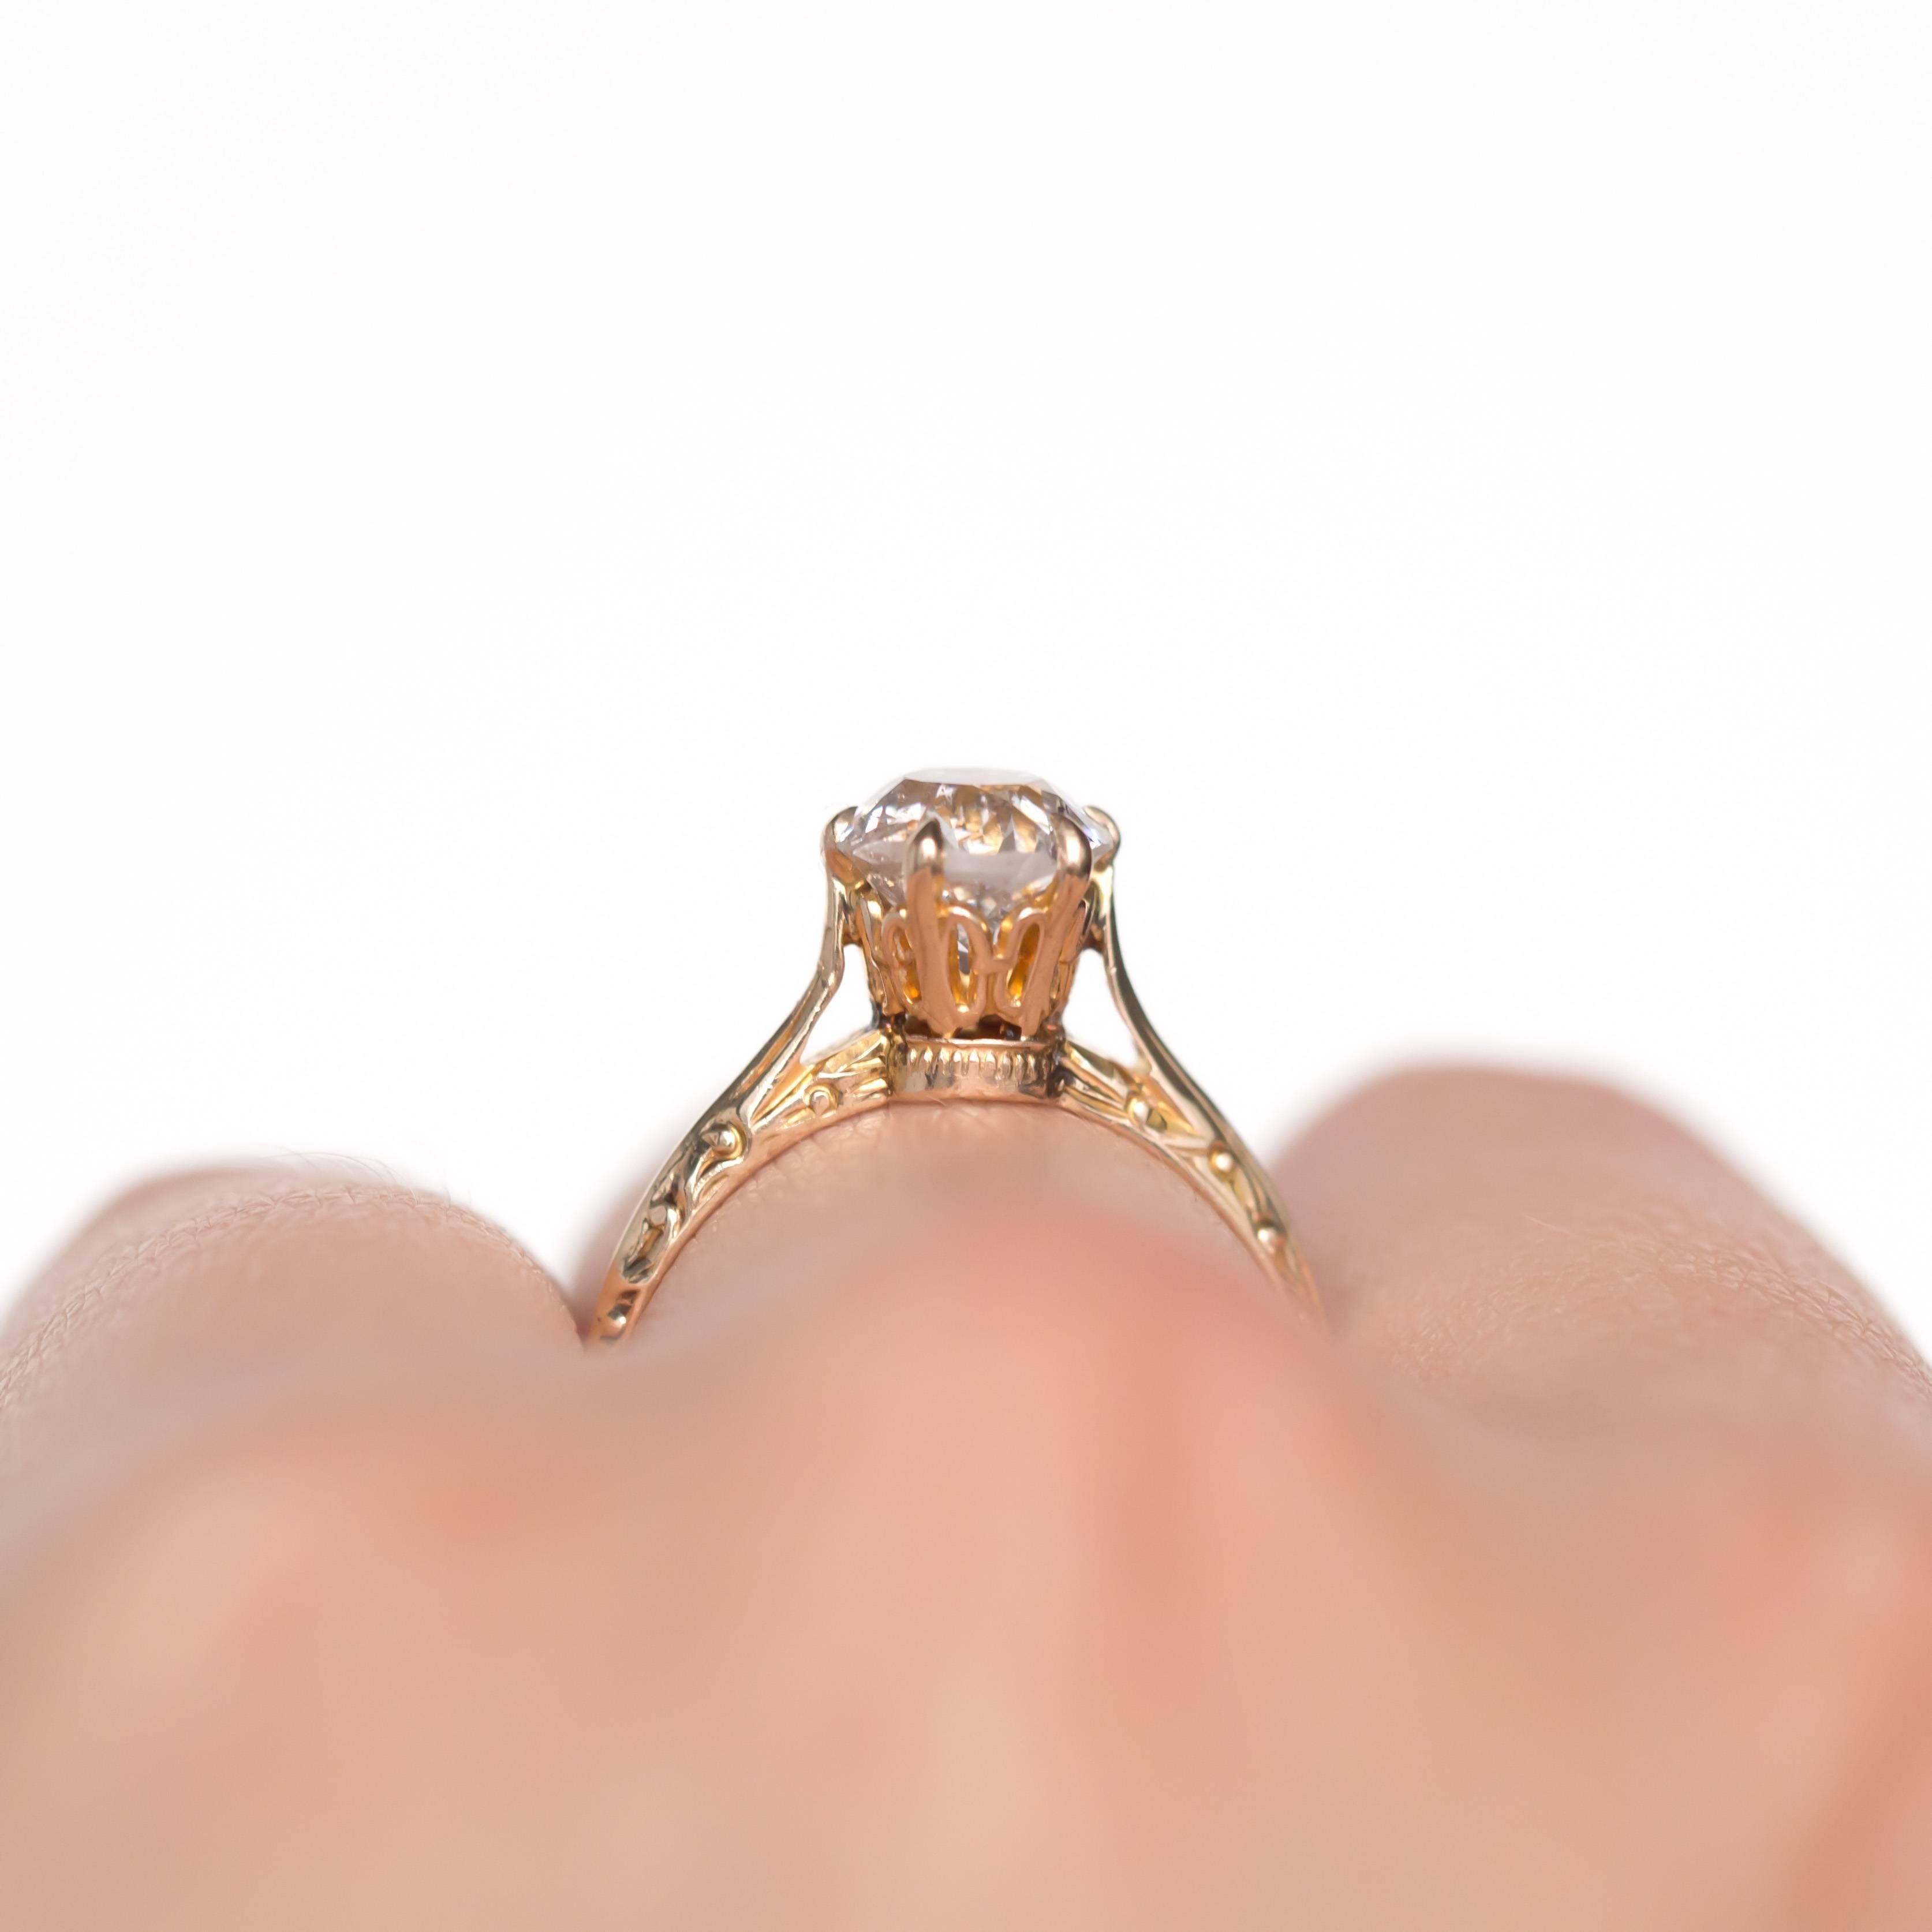 1.75 Carat Diamond Yellow Gold Engagement Ring In Excellent Condition For Sale In Atlanta, GA